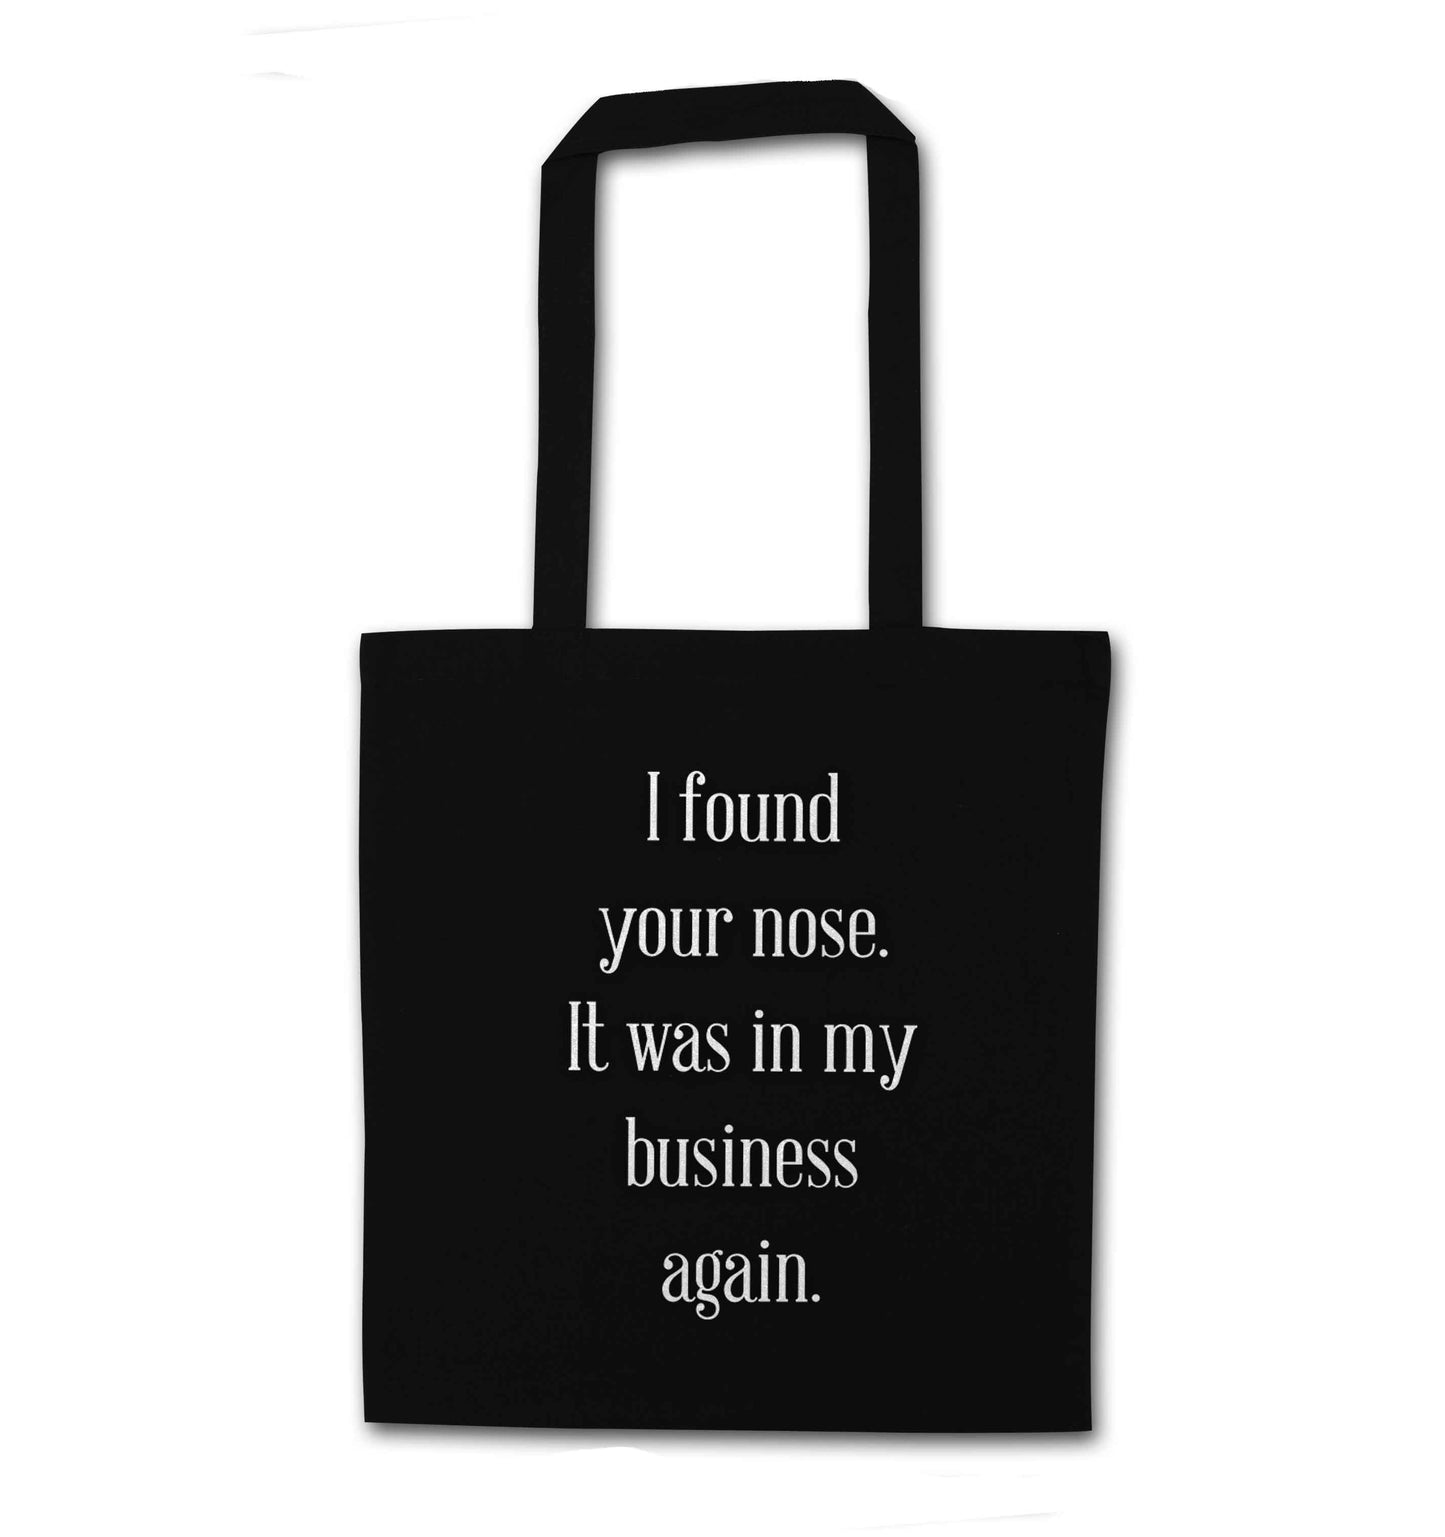 I found your nose it was in my business again black tote bag